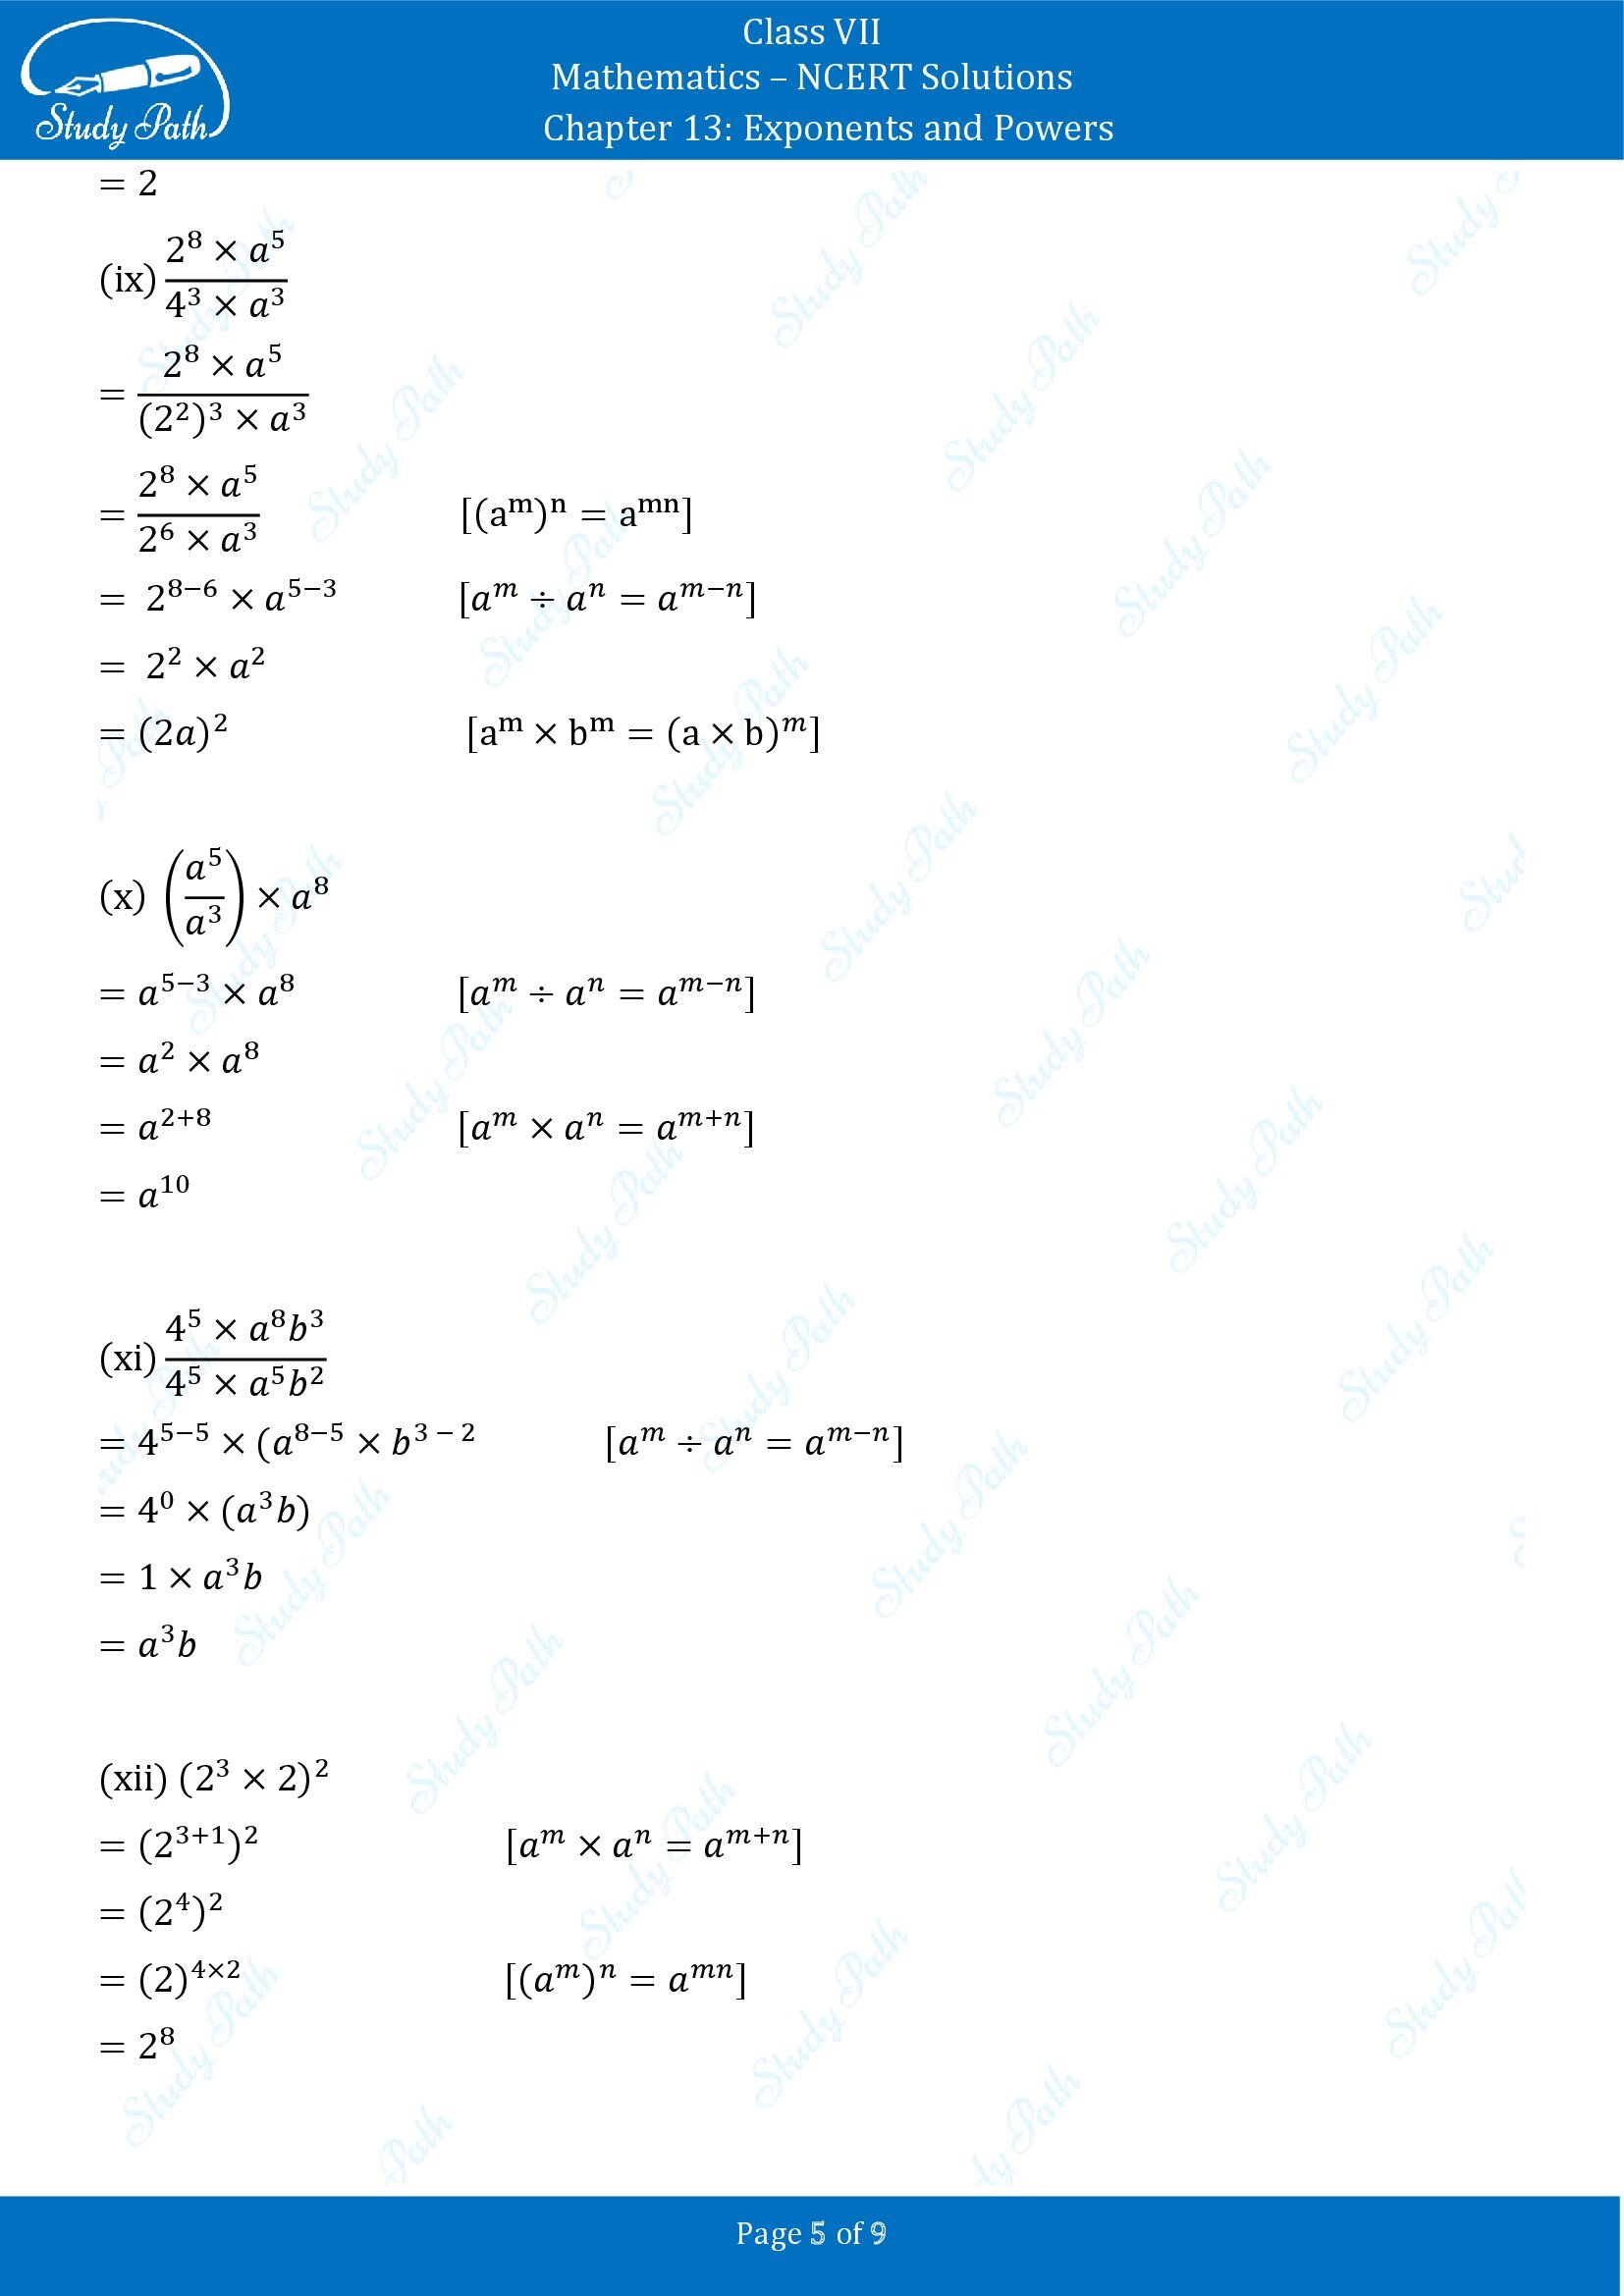 NCERT Solutions for Class 7 Maths Chapter 13 Exponents and Powers Exercise 13.2 00005